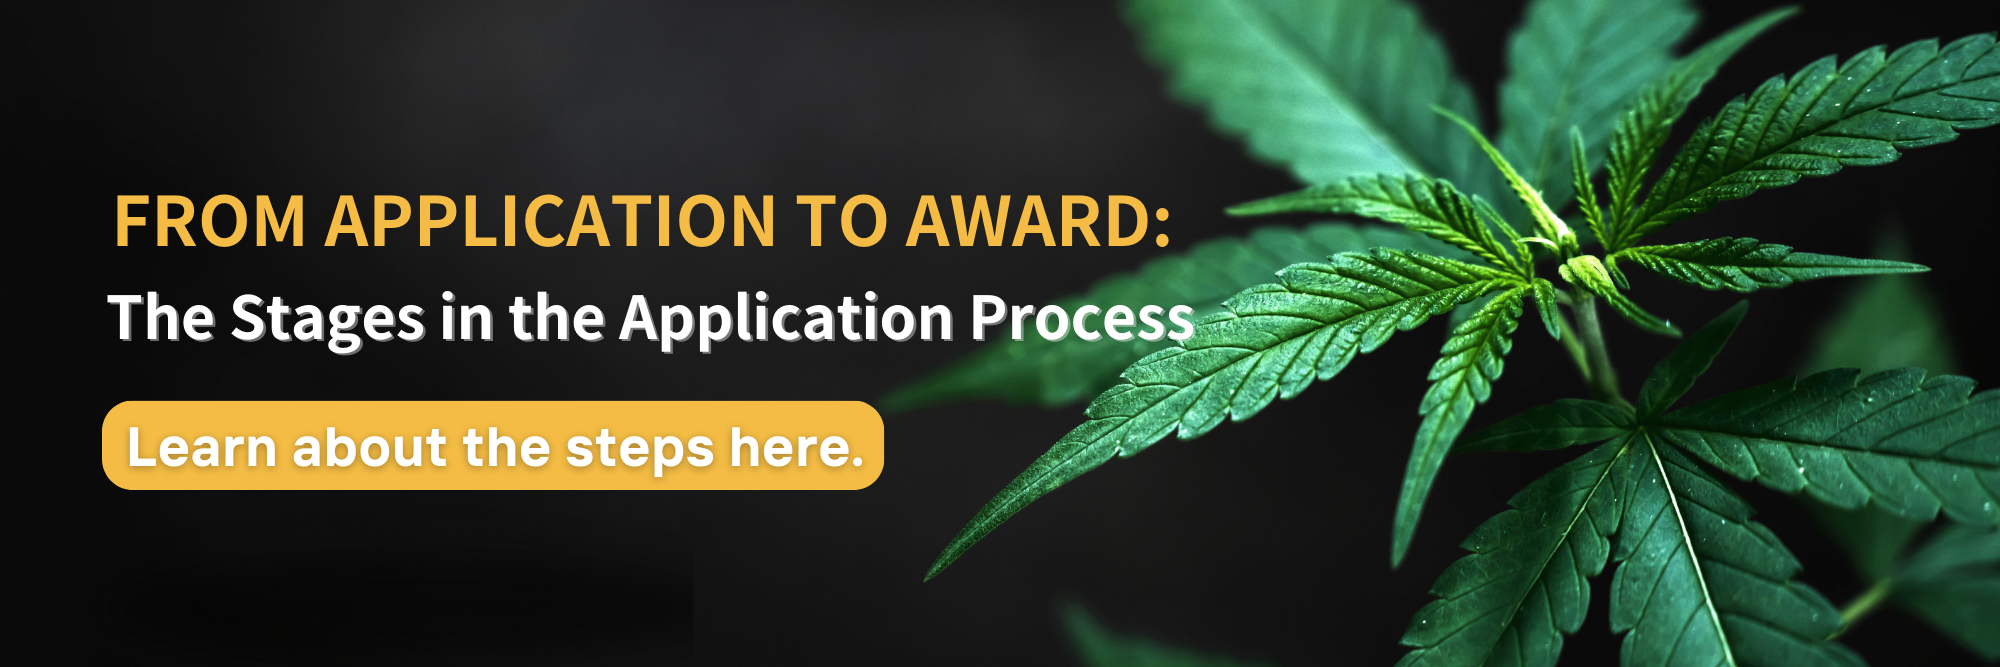 From application to award: the stages of the application process